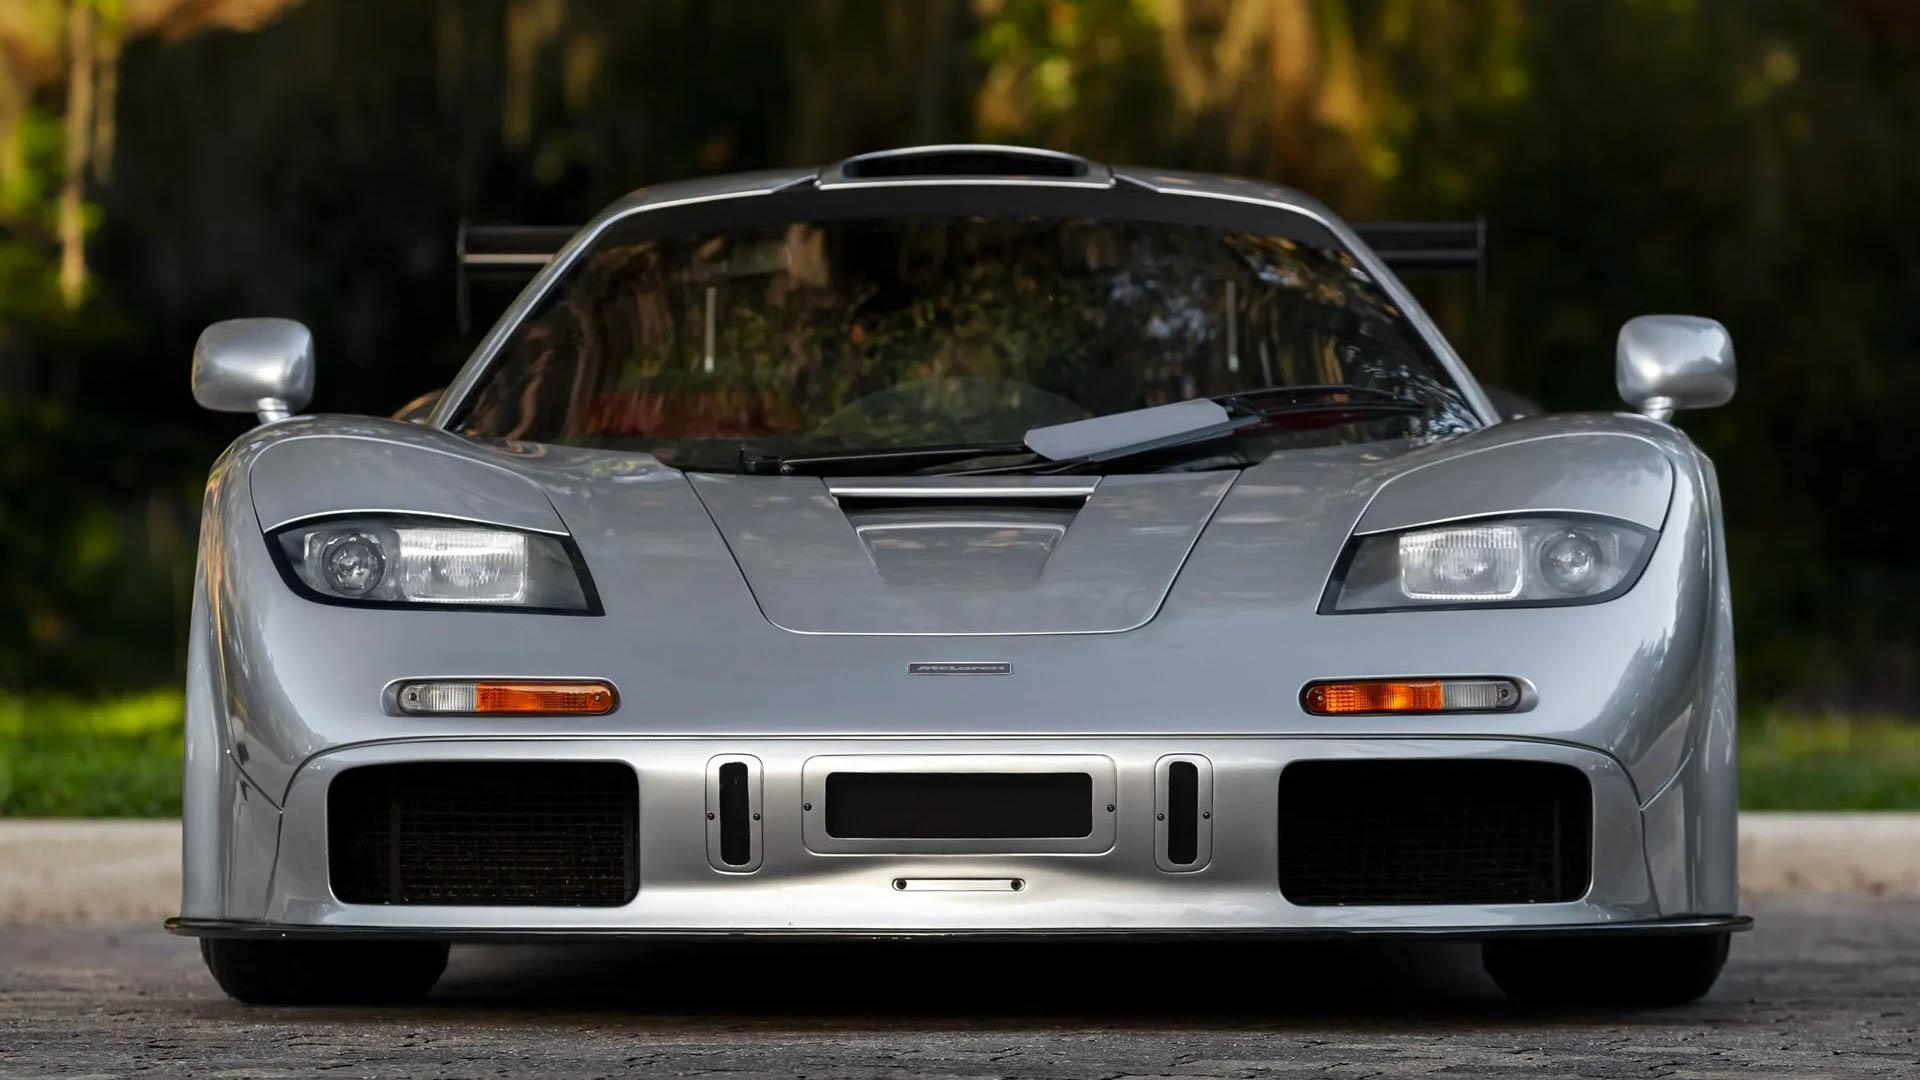 This One-of-One McLaren F1 Headed to Auction Fixes Its Only Flaw